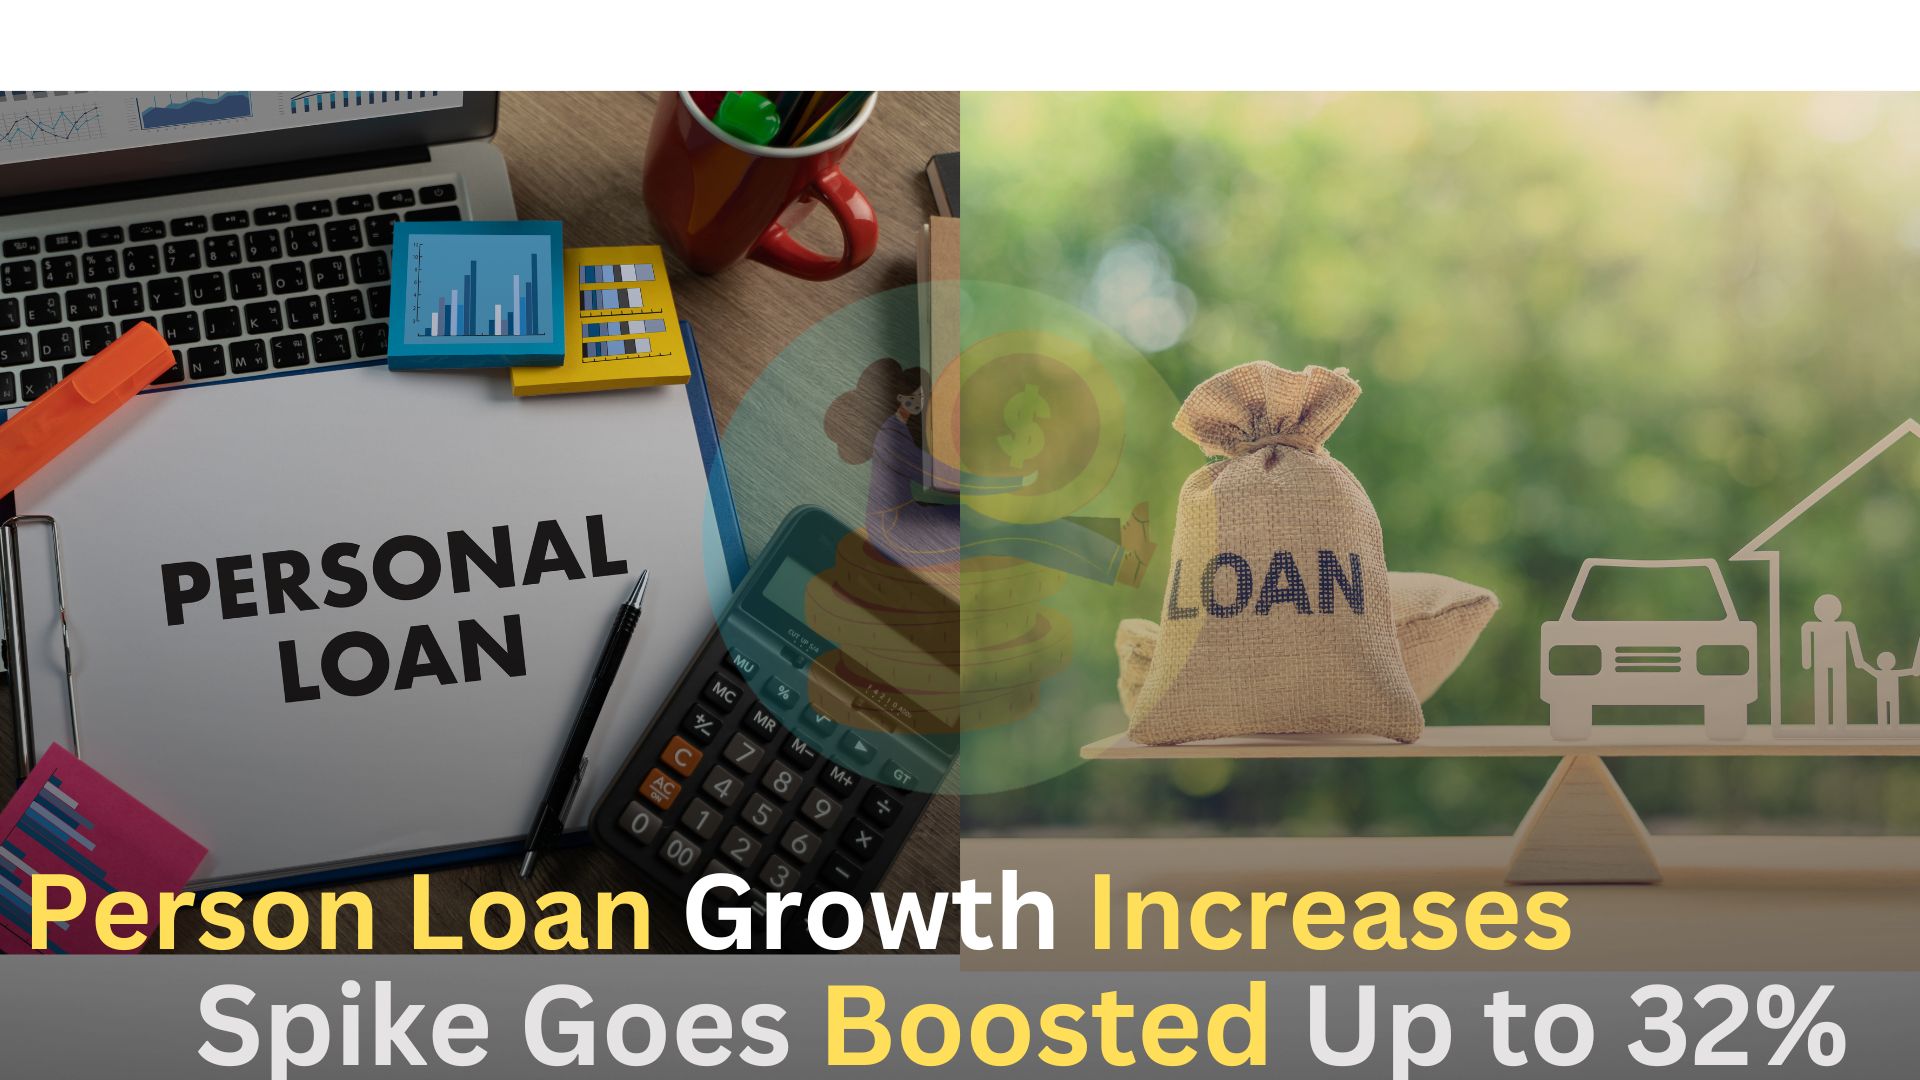 Person Loan Growth Increases,Spike Goes Boosted Up to 32%